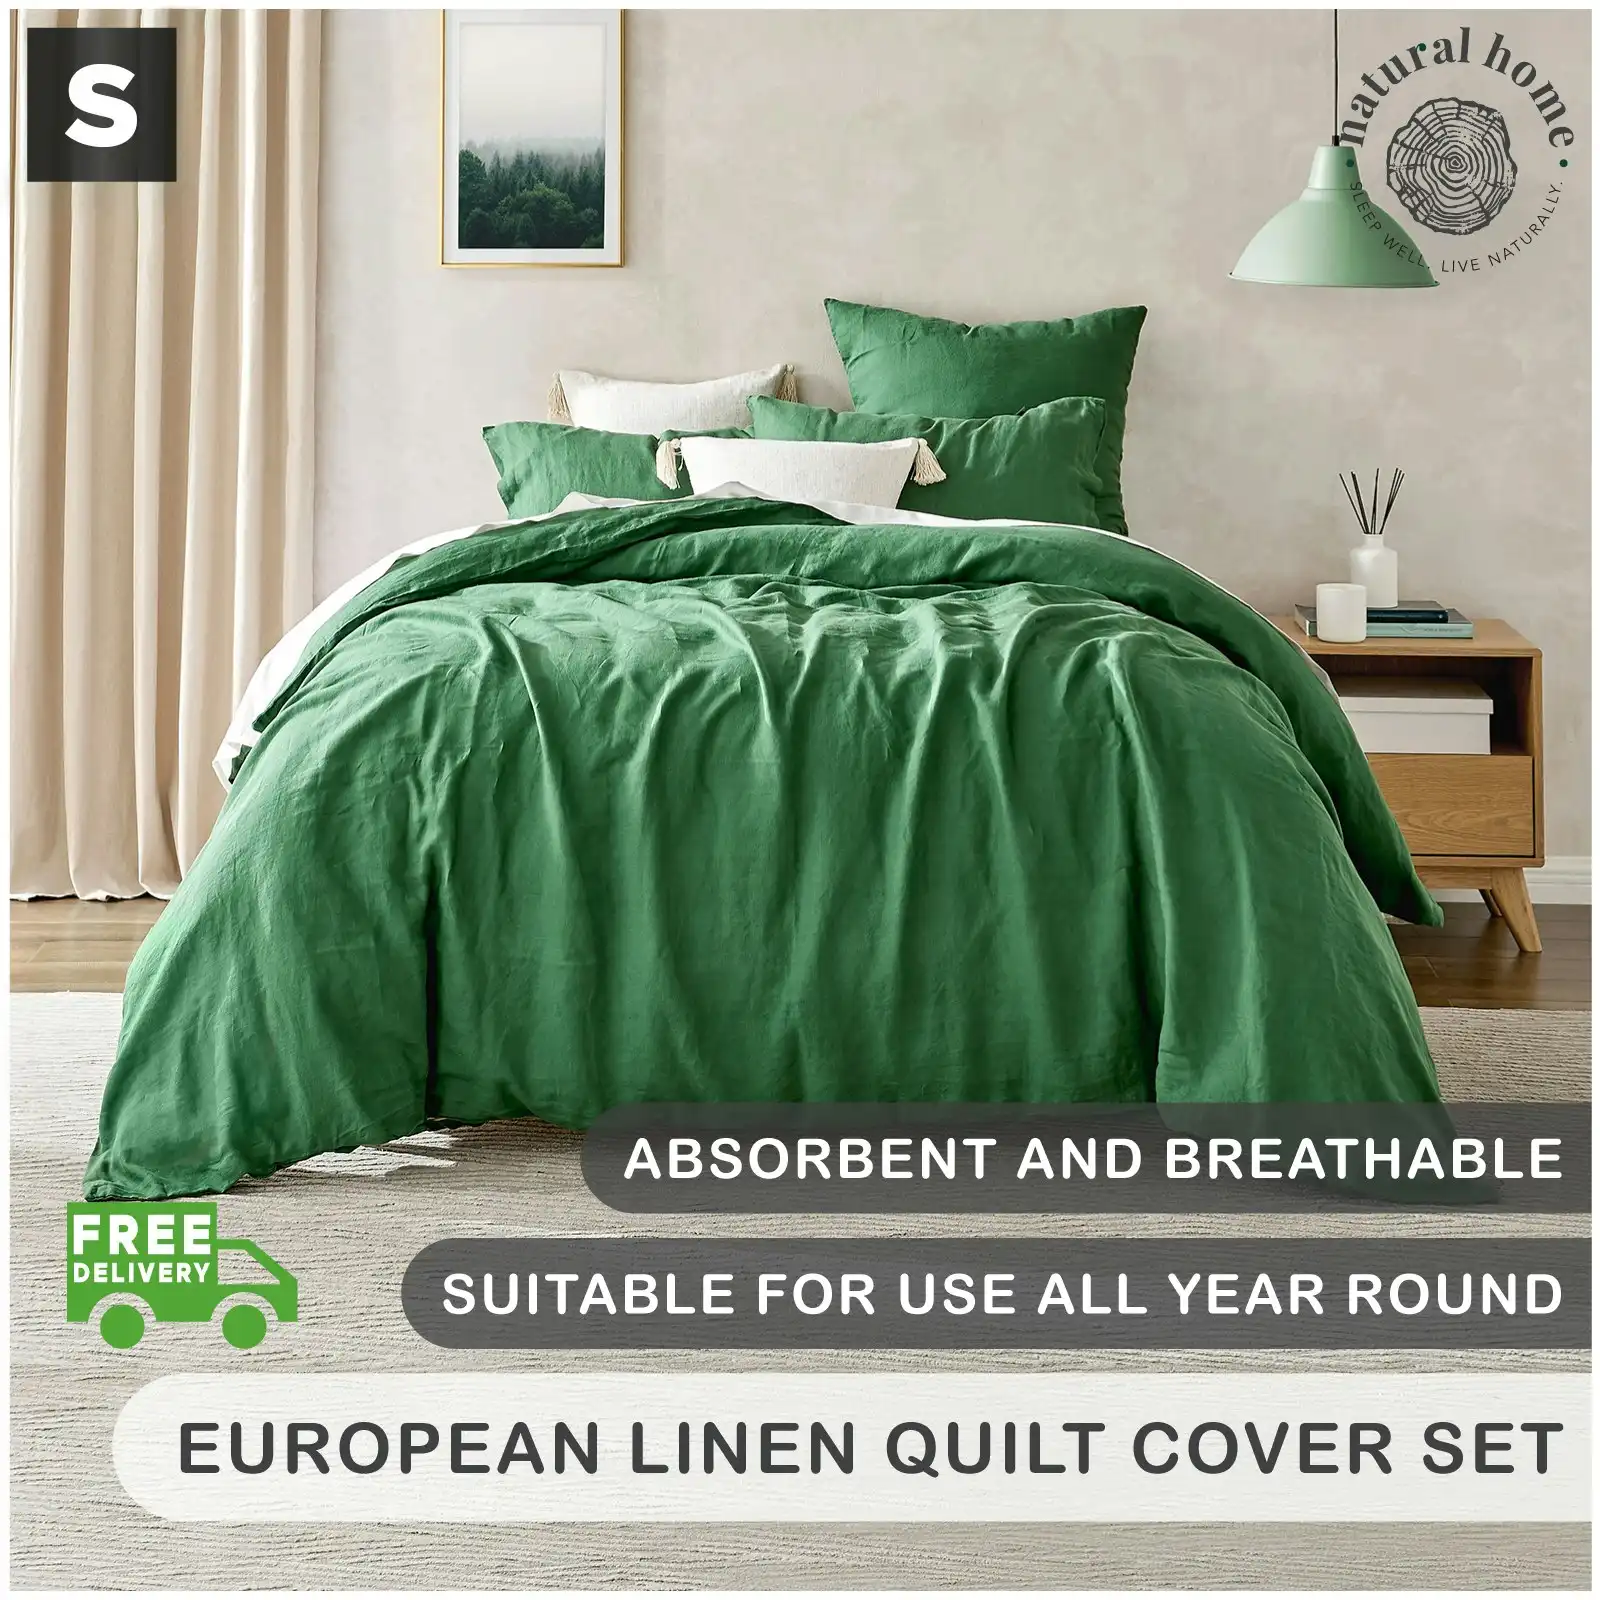 Natural Home Linen 100% European Flax Linen Quilt Cover Set Olive Single Bed